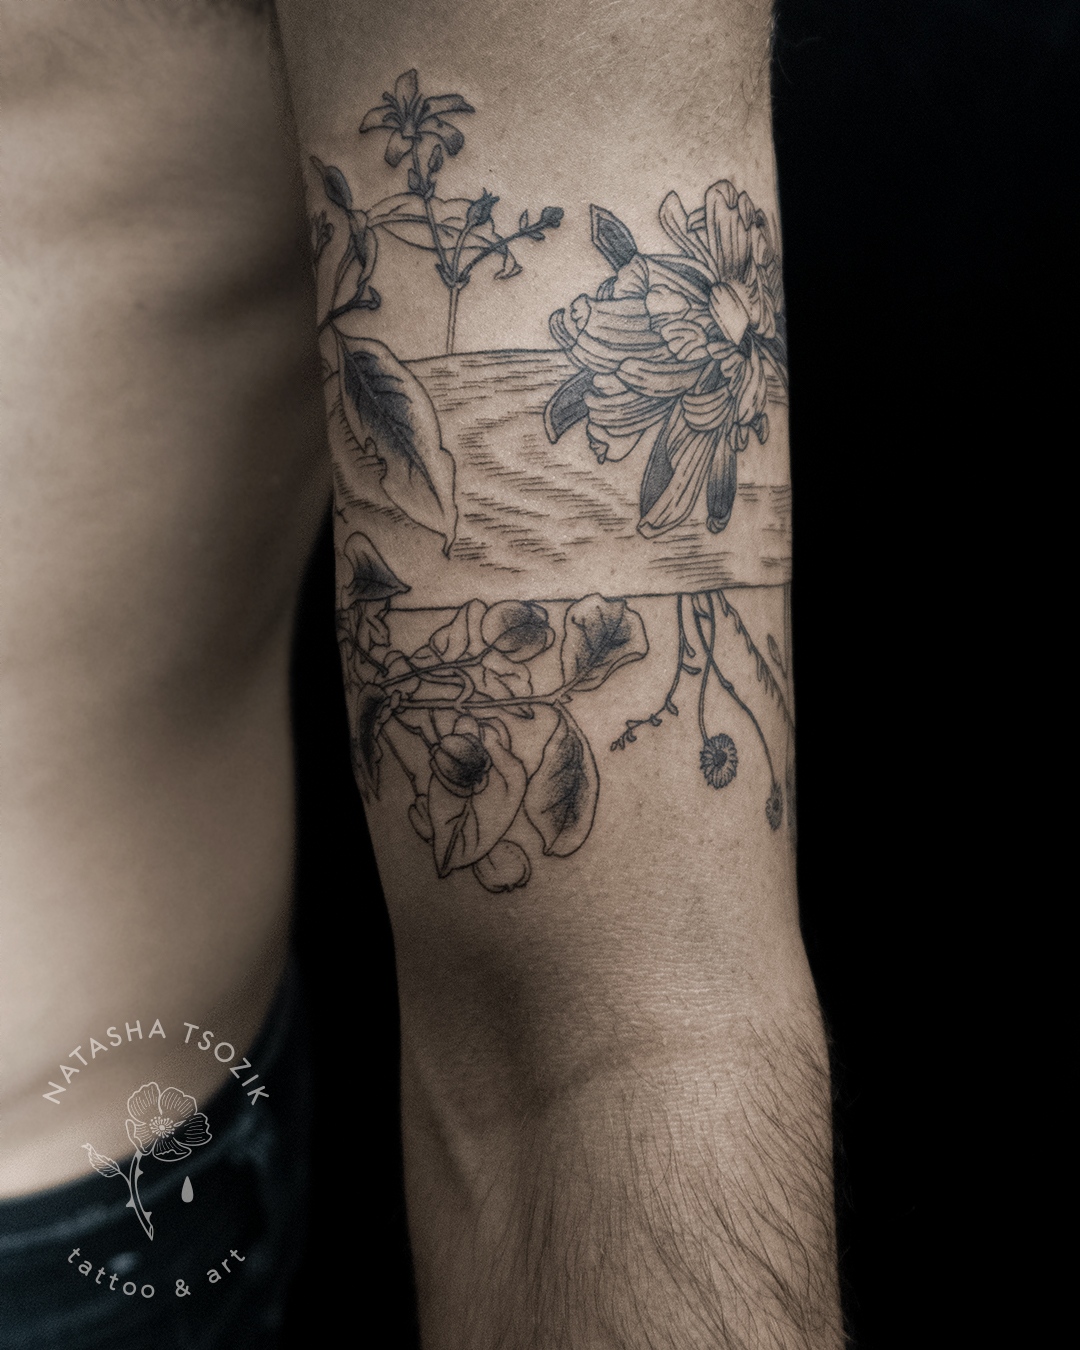 Flower armband tattoo on the right forearm